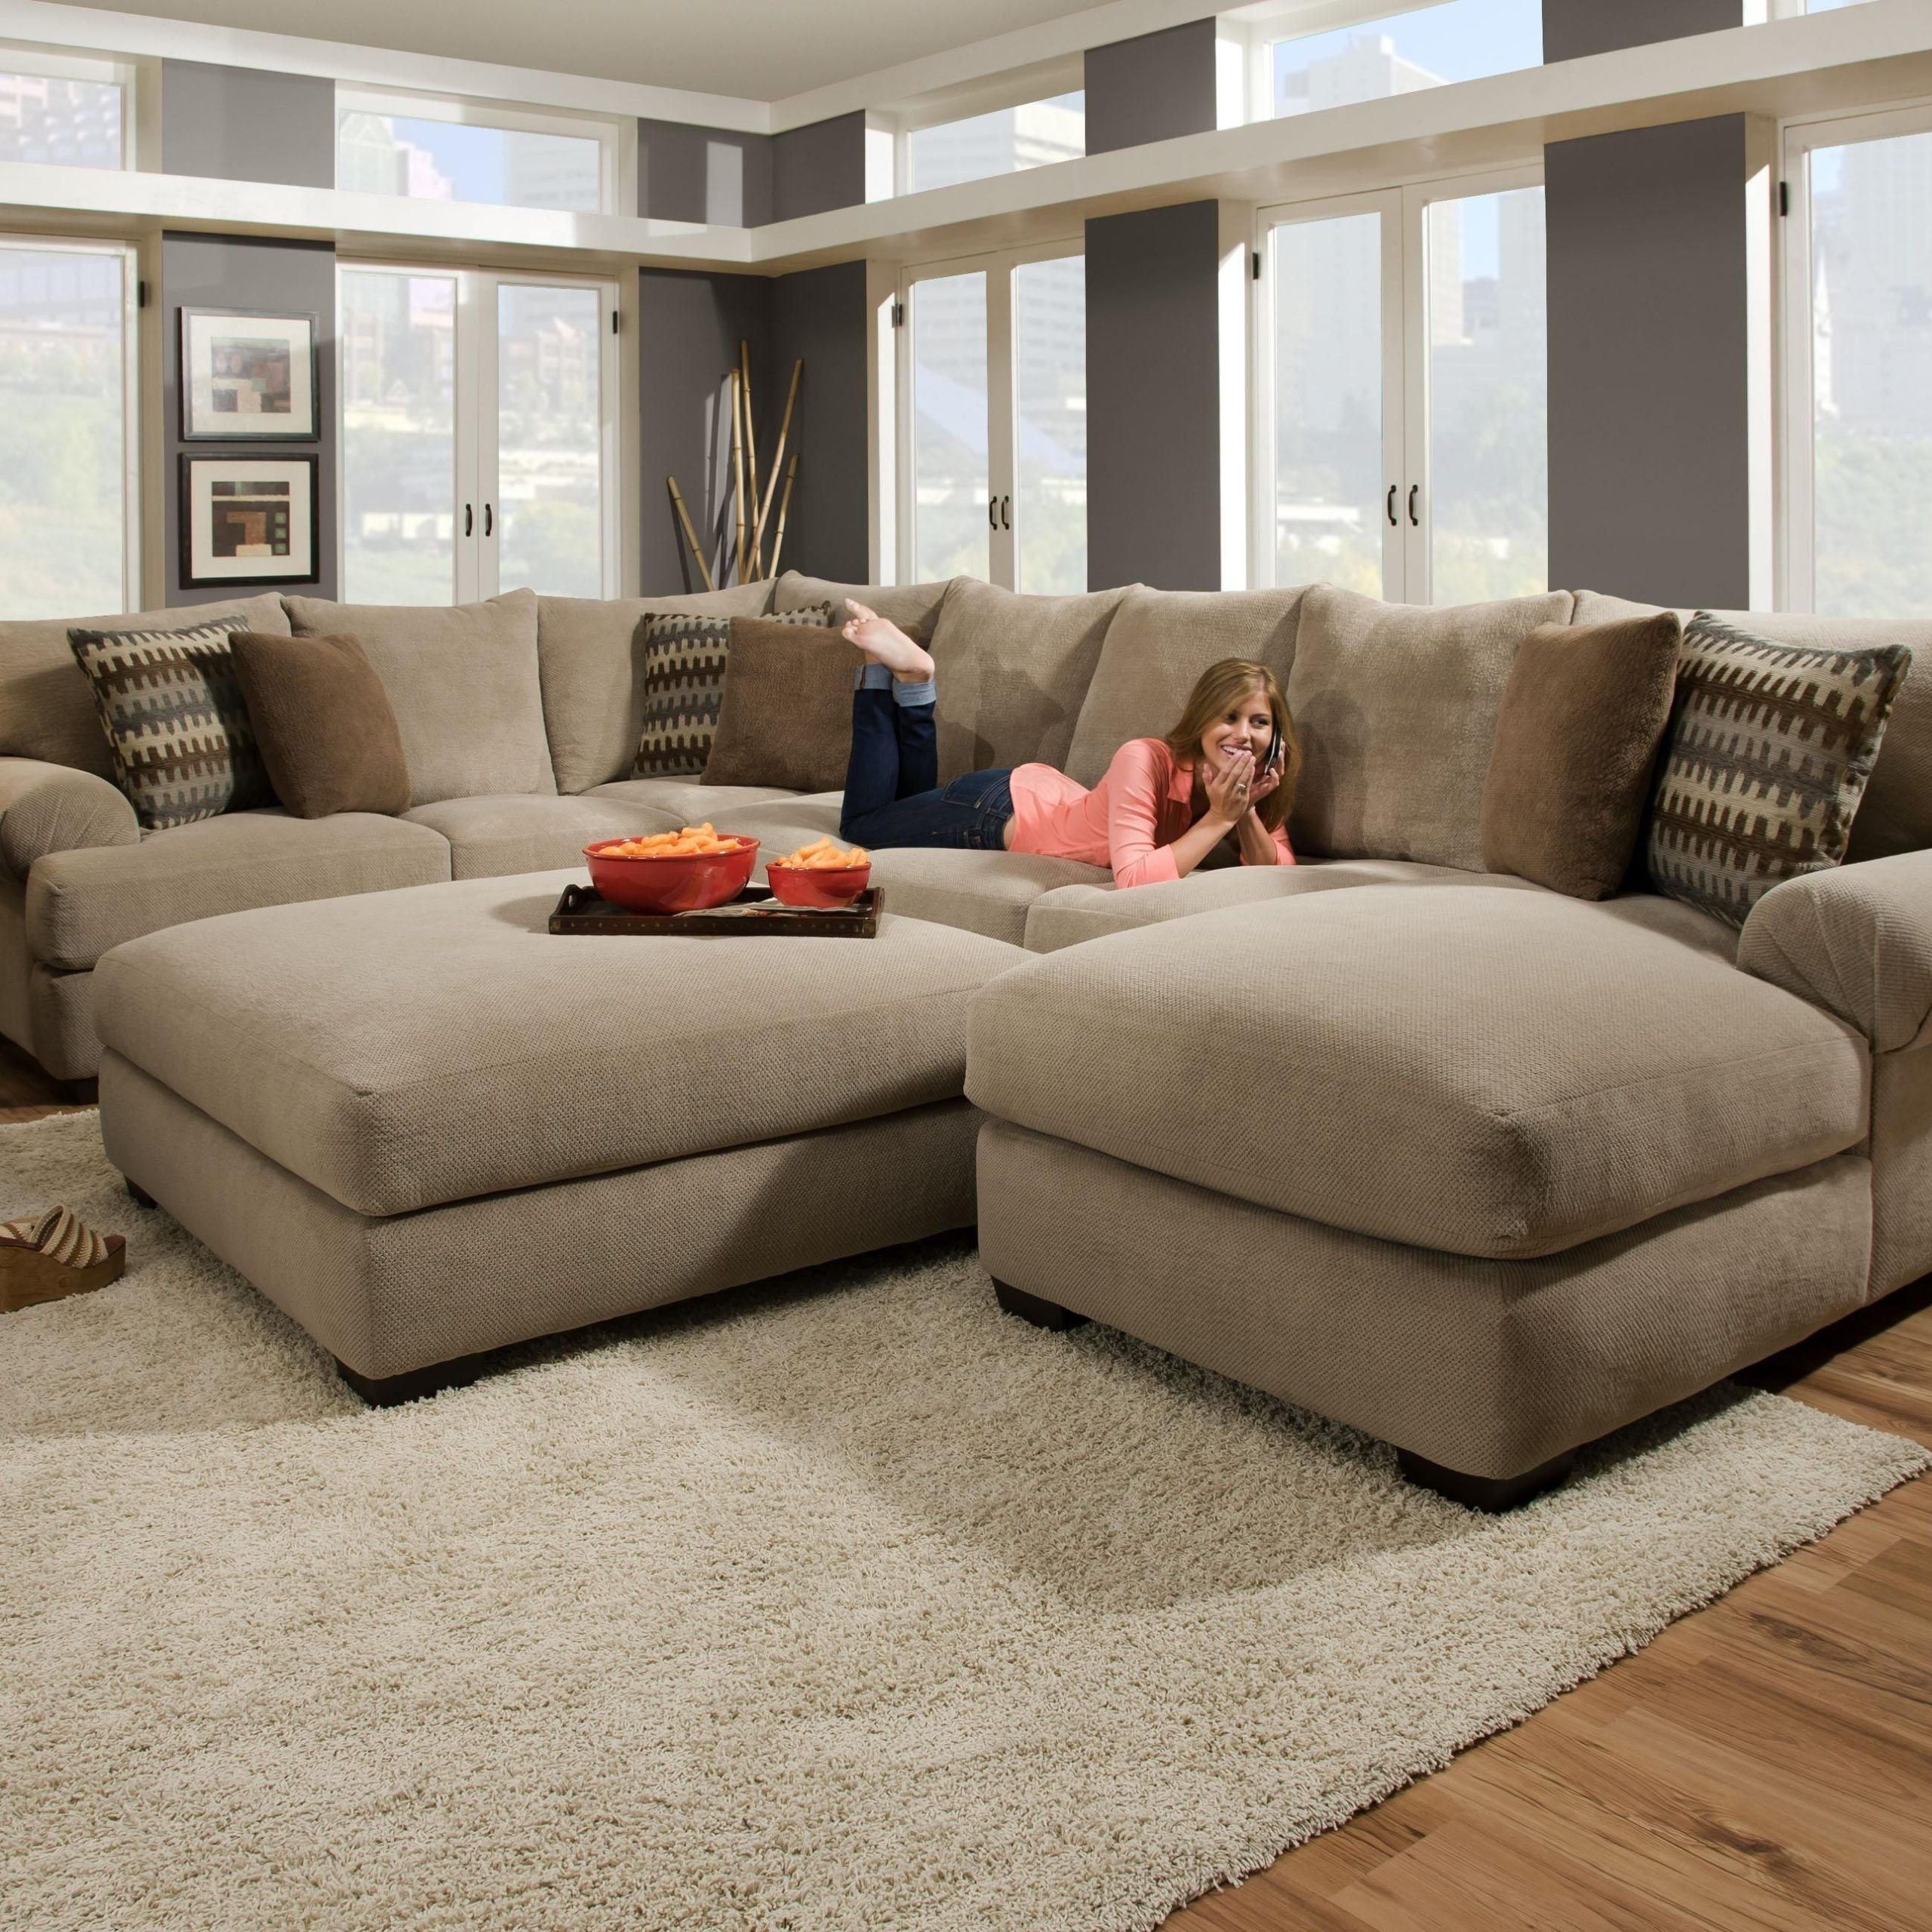 Best 10+ Of Deep U Shaped Sectionals | Comfortable Sectional Sofa For U Shaped Couches In Beige (Gallery 13 of 20)